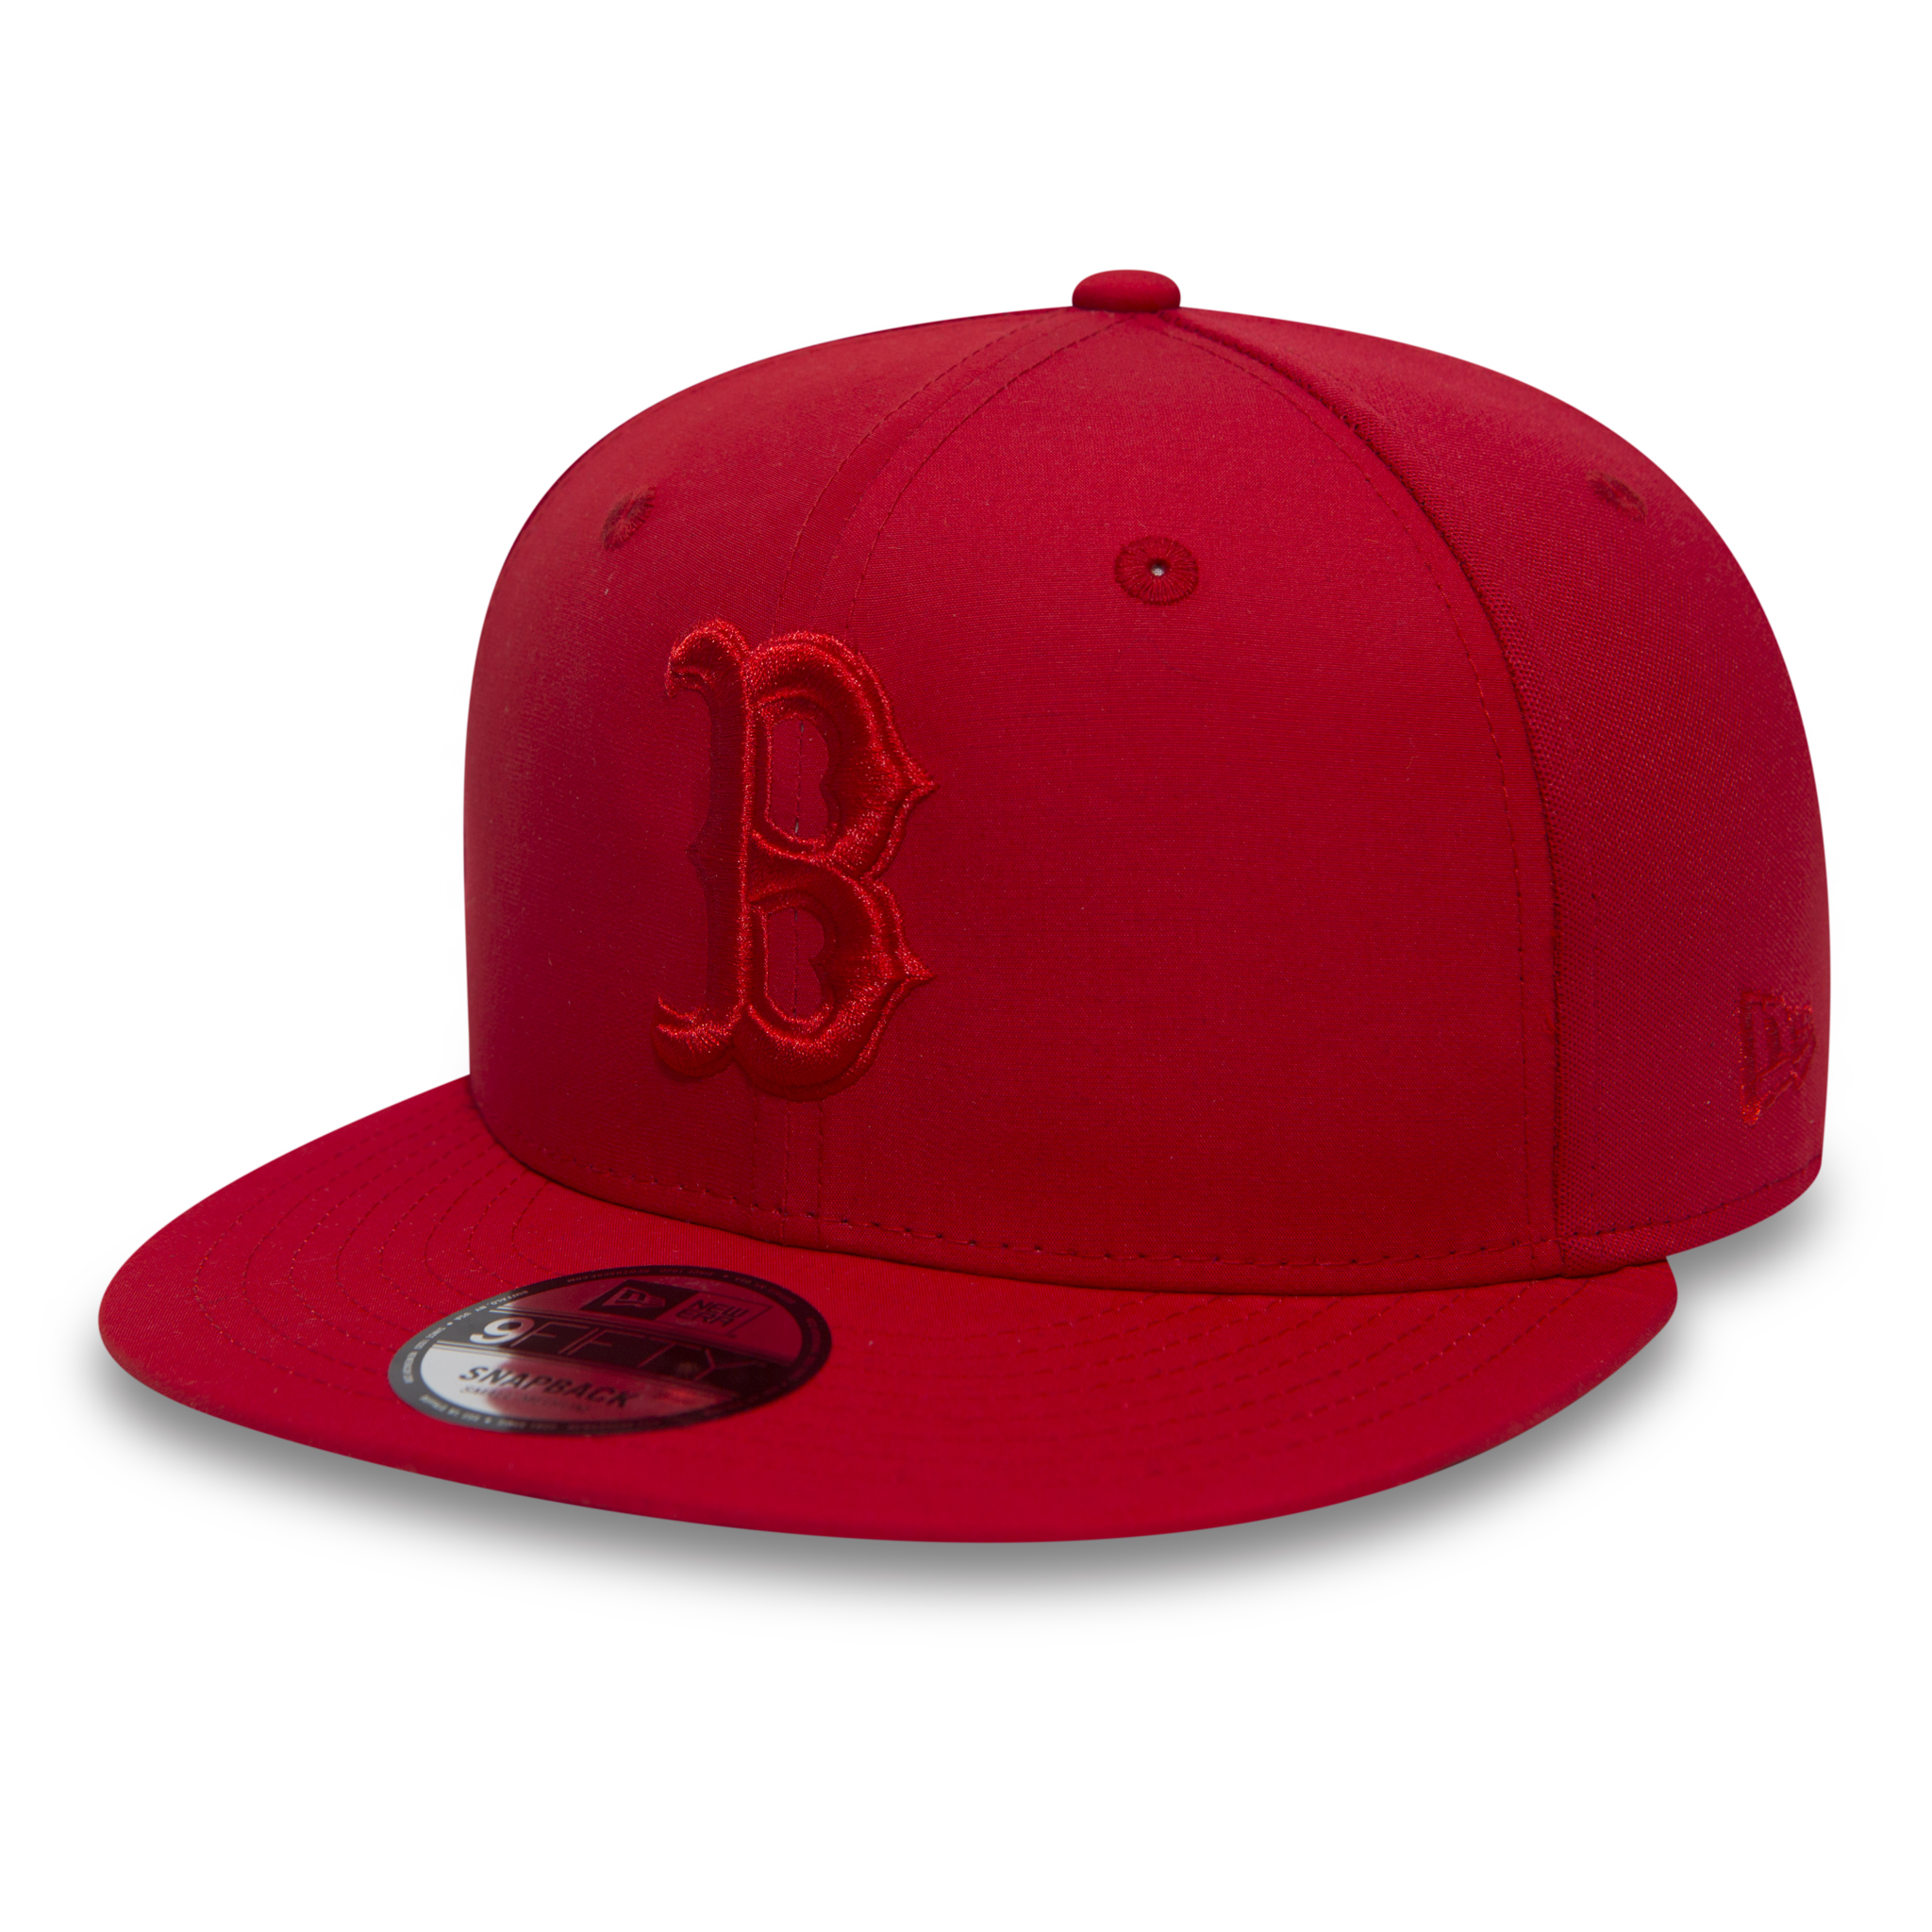 Boston Red Sox Scarlet 9FIFTY Cap